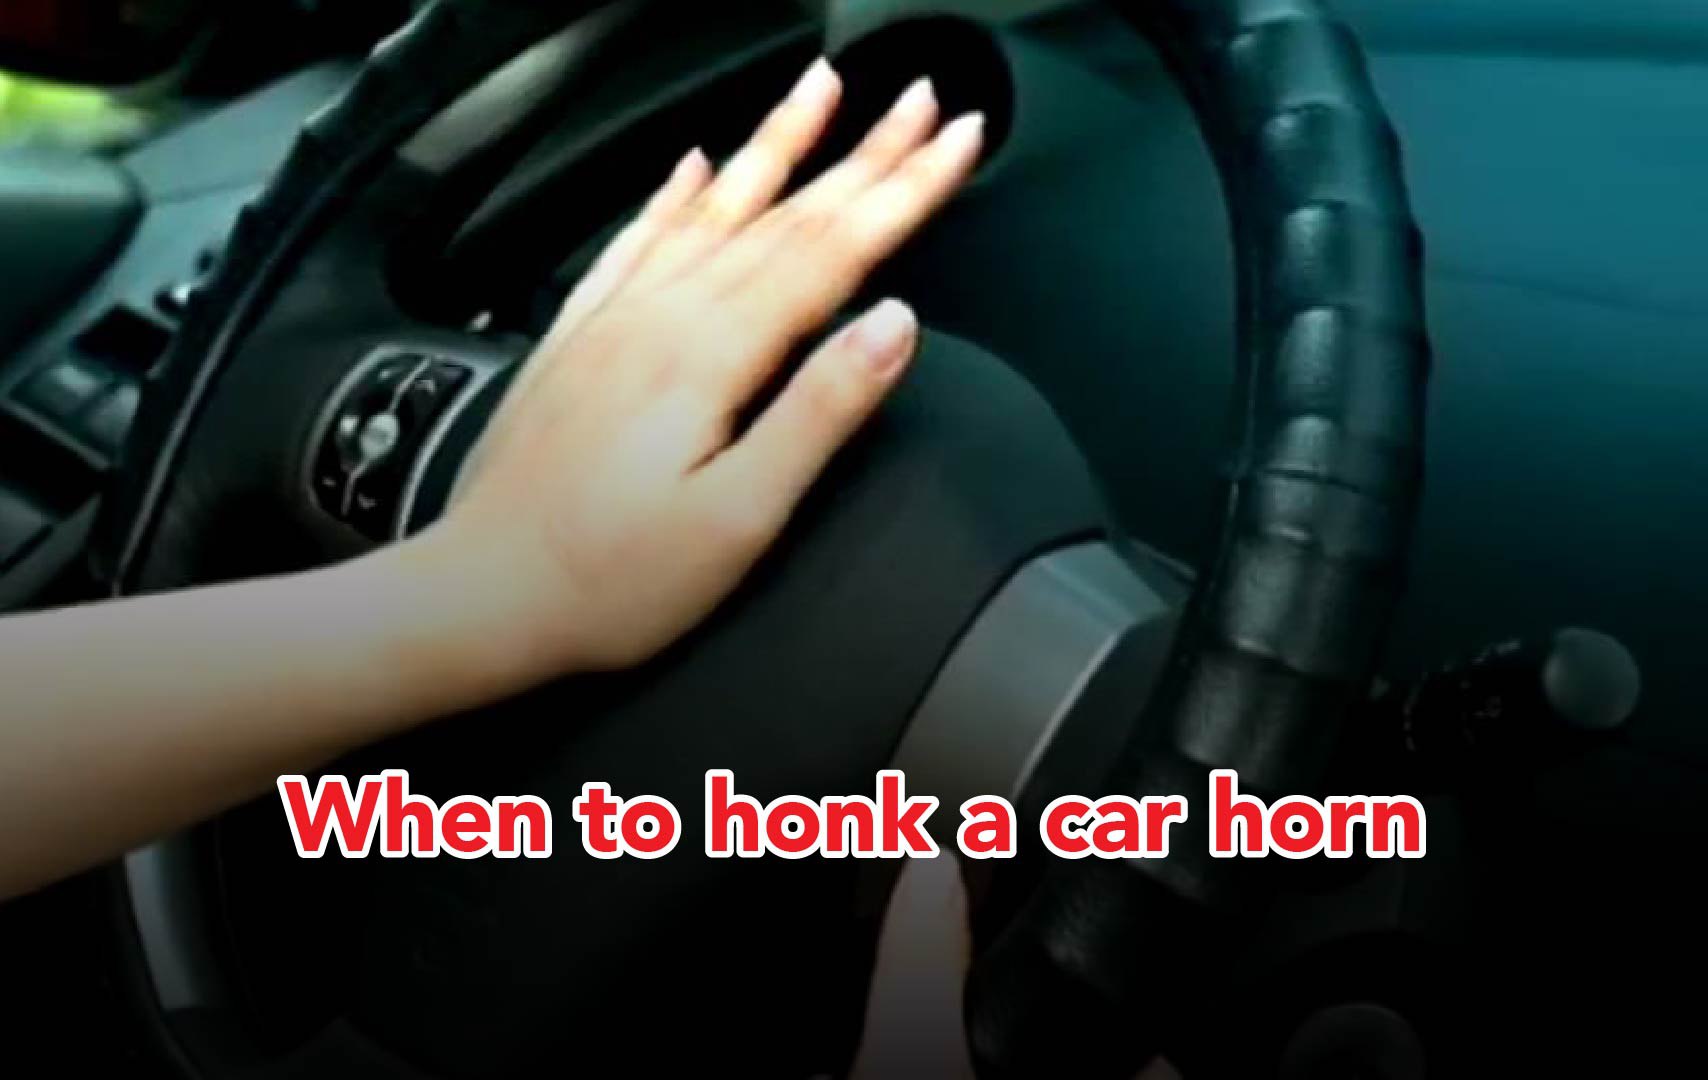 When Should You Use Your Car Horn?